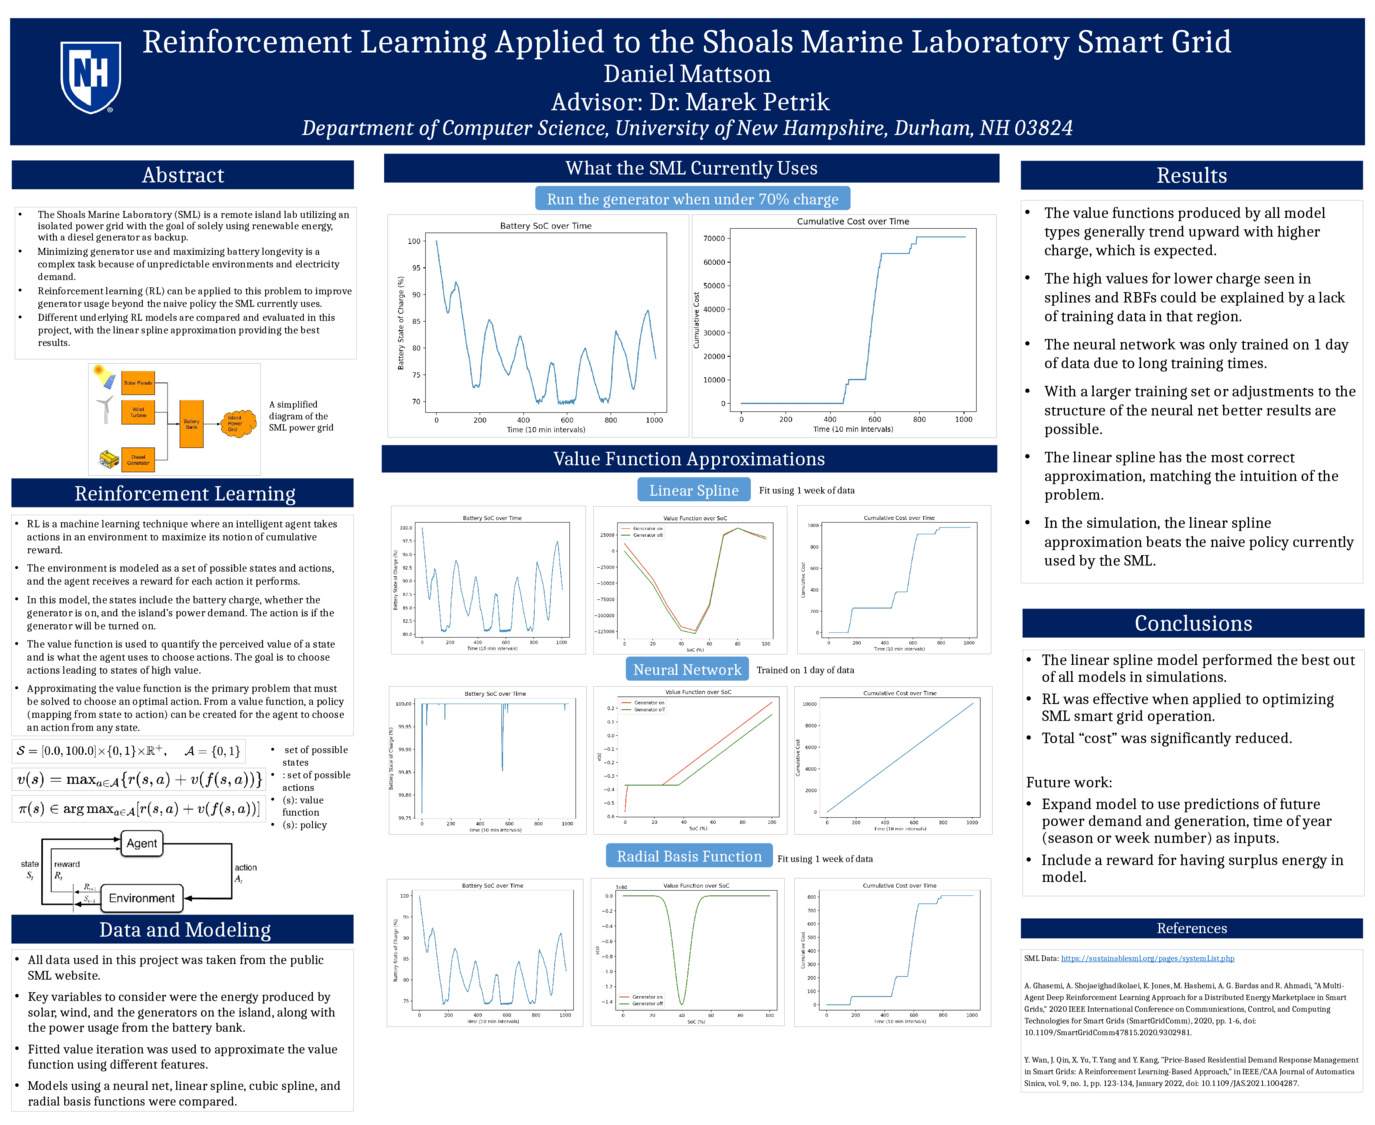 Reinforcement Learning Applied To The Shoals Marine Laboratory Smart Grid by dcm1030